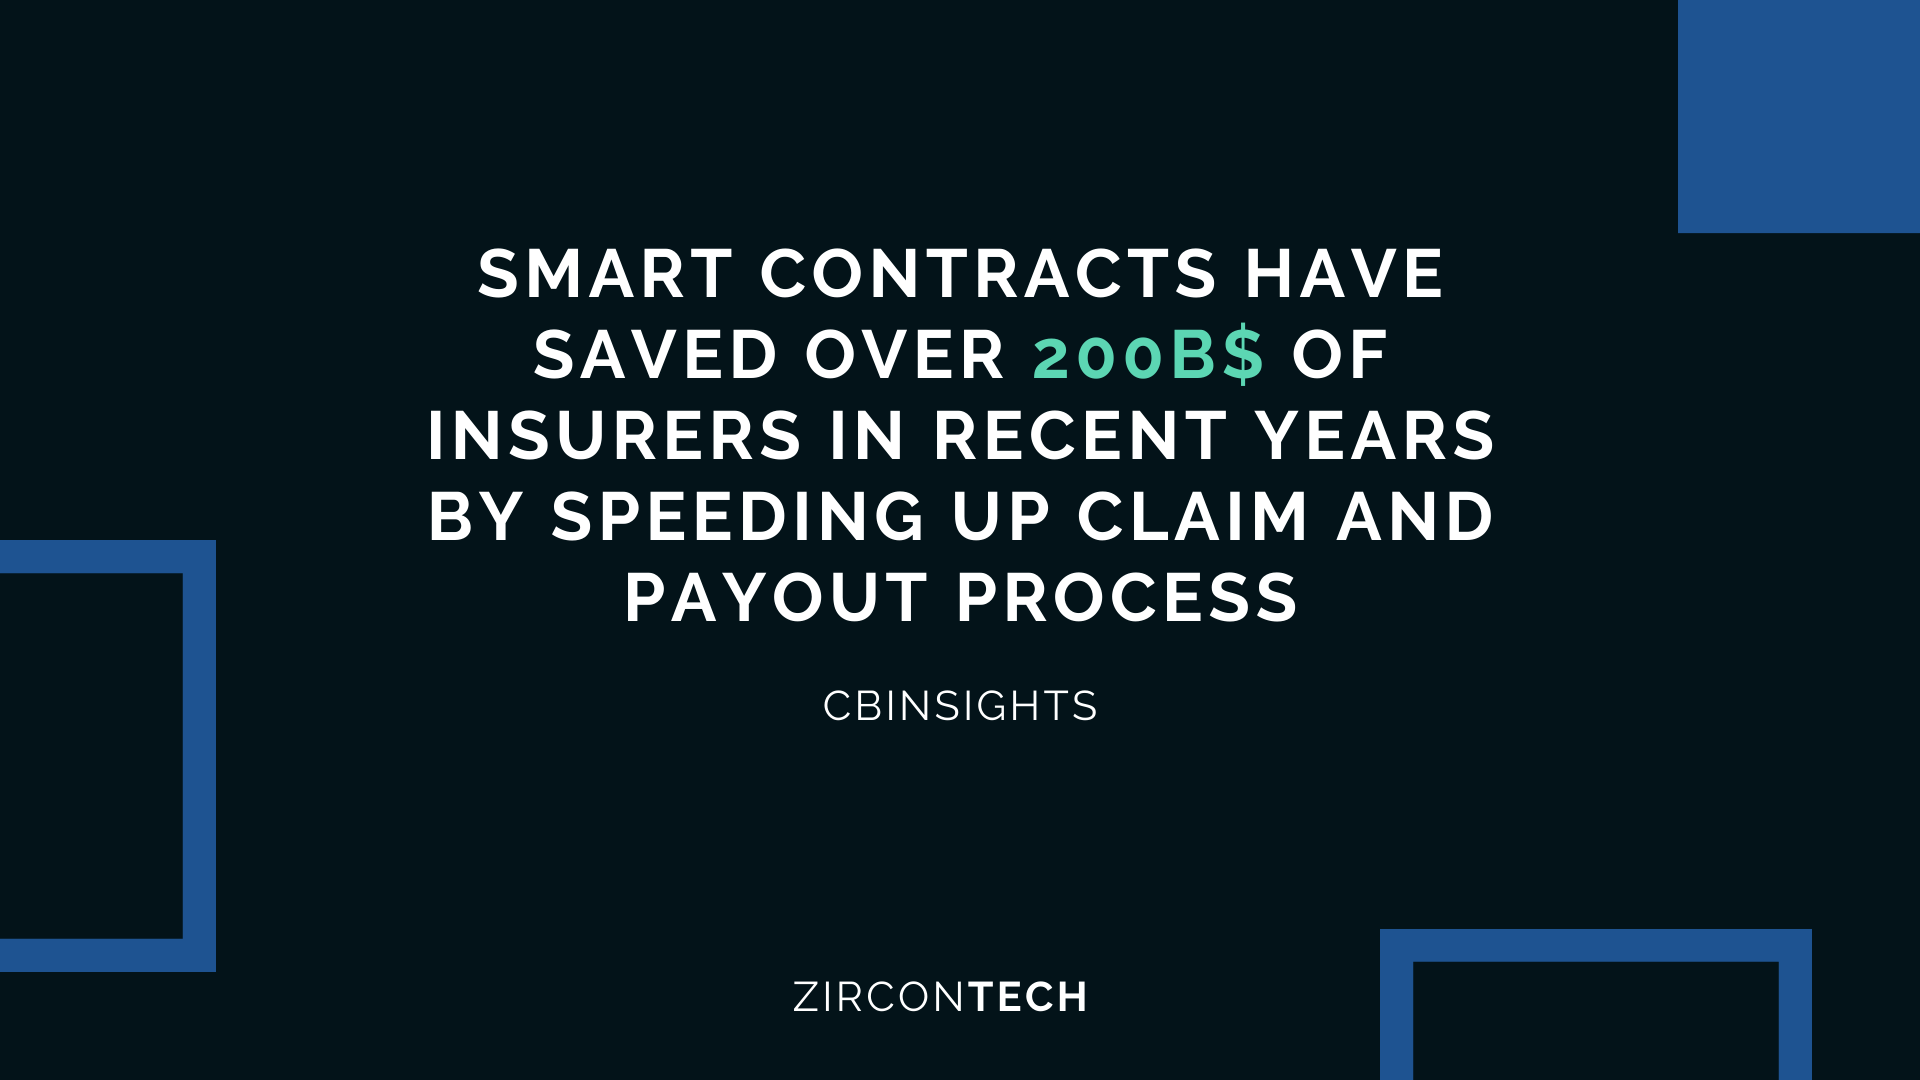 Smart Contracts have saved over 200 billions of insurers in recent years by speeding up claim and payout process related to Blockchain